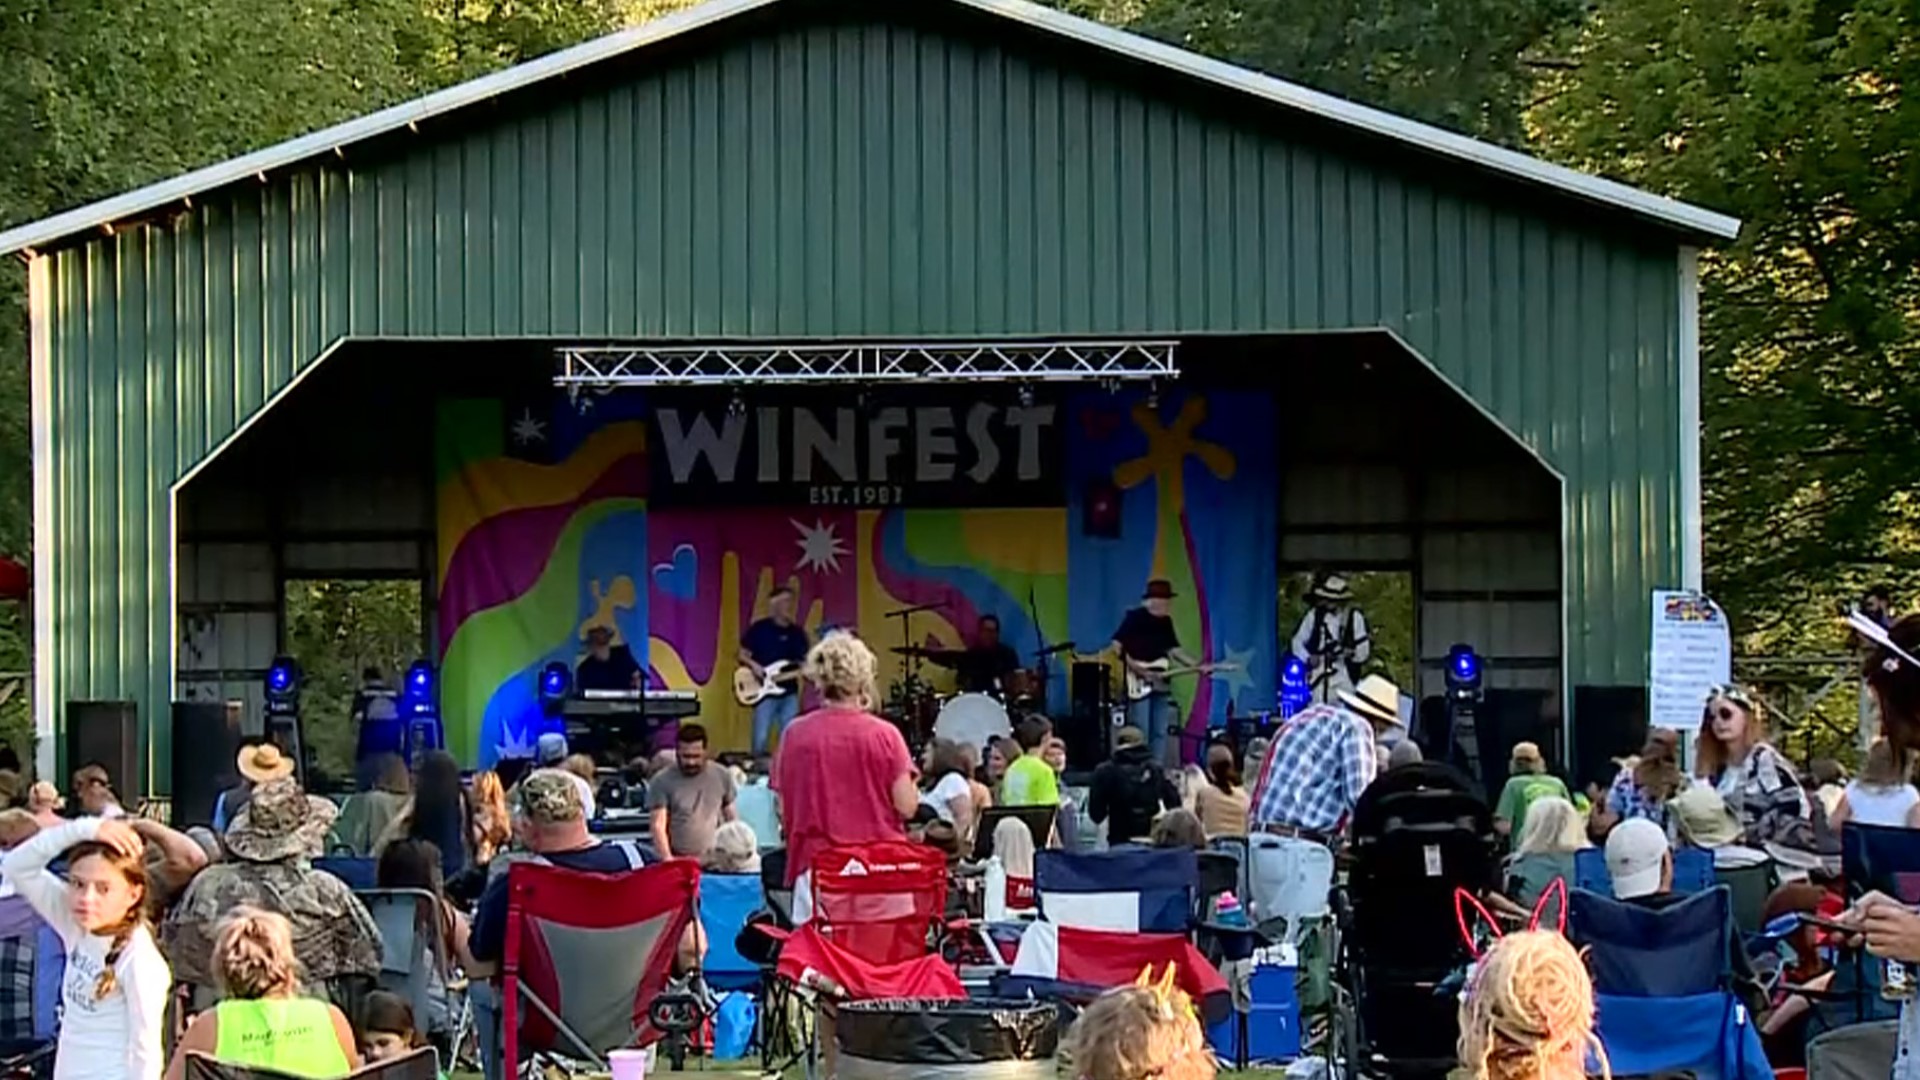 The 40TH Winfest Music Festival took place in Winslow on Saturday, Sept. 16.